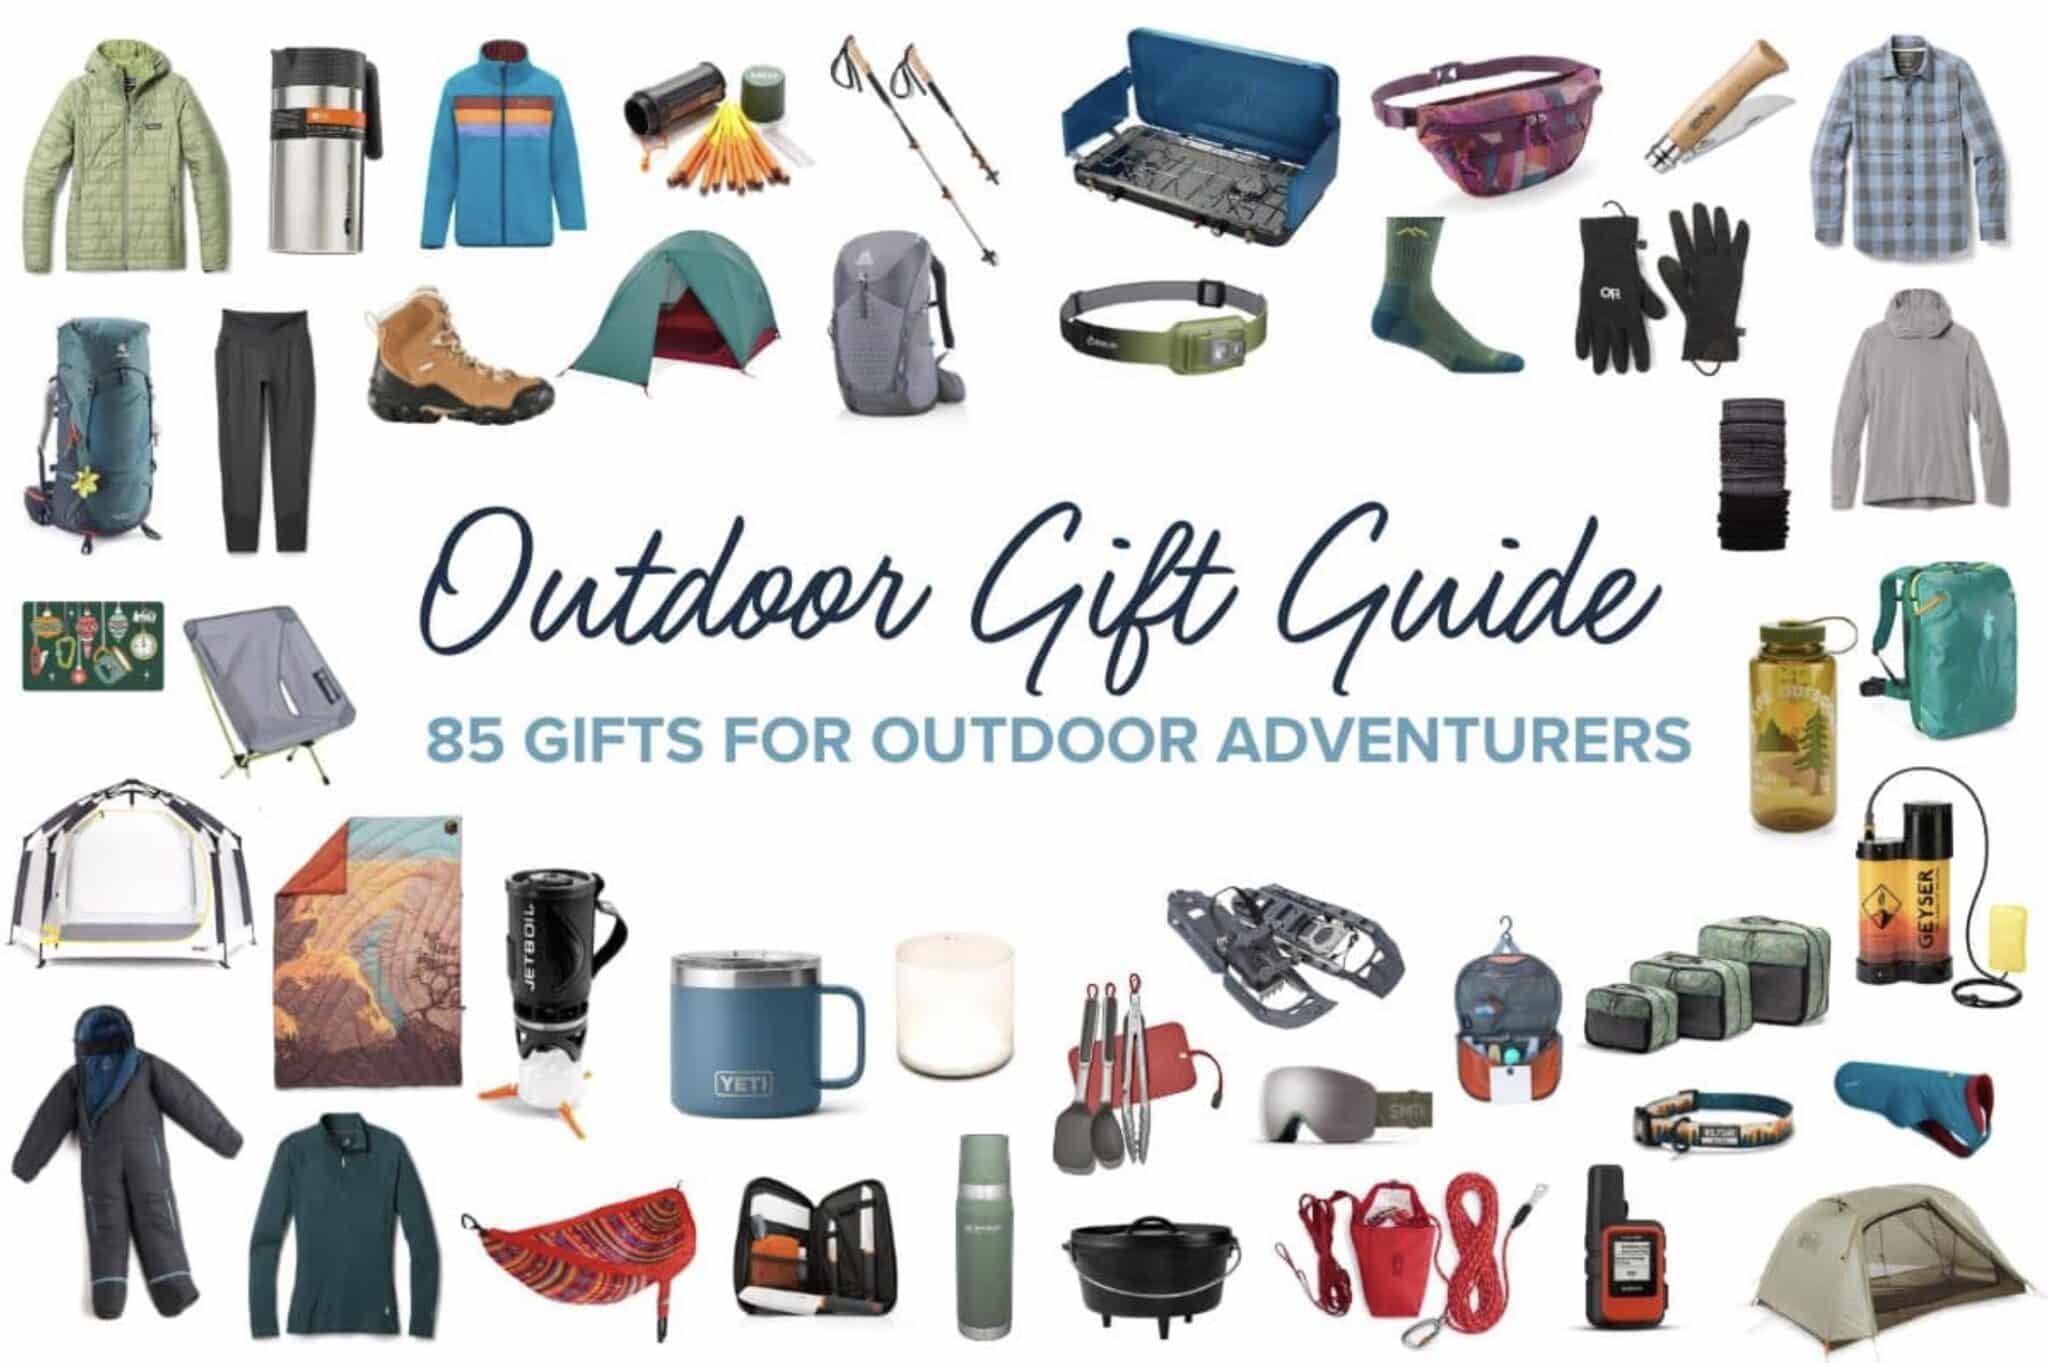 Outdoor gift guide